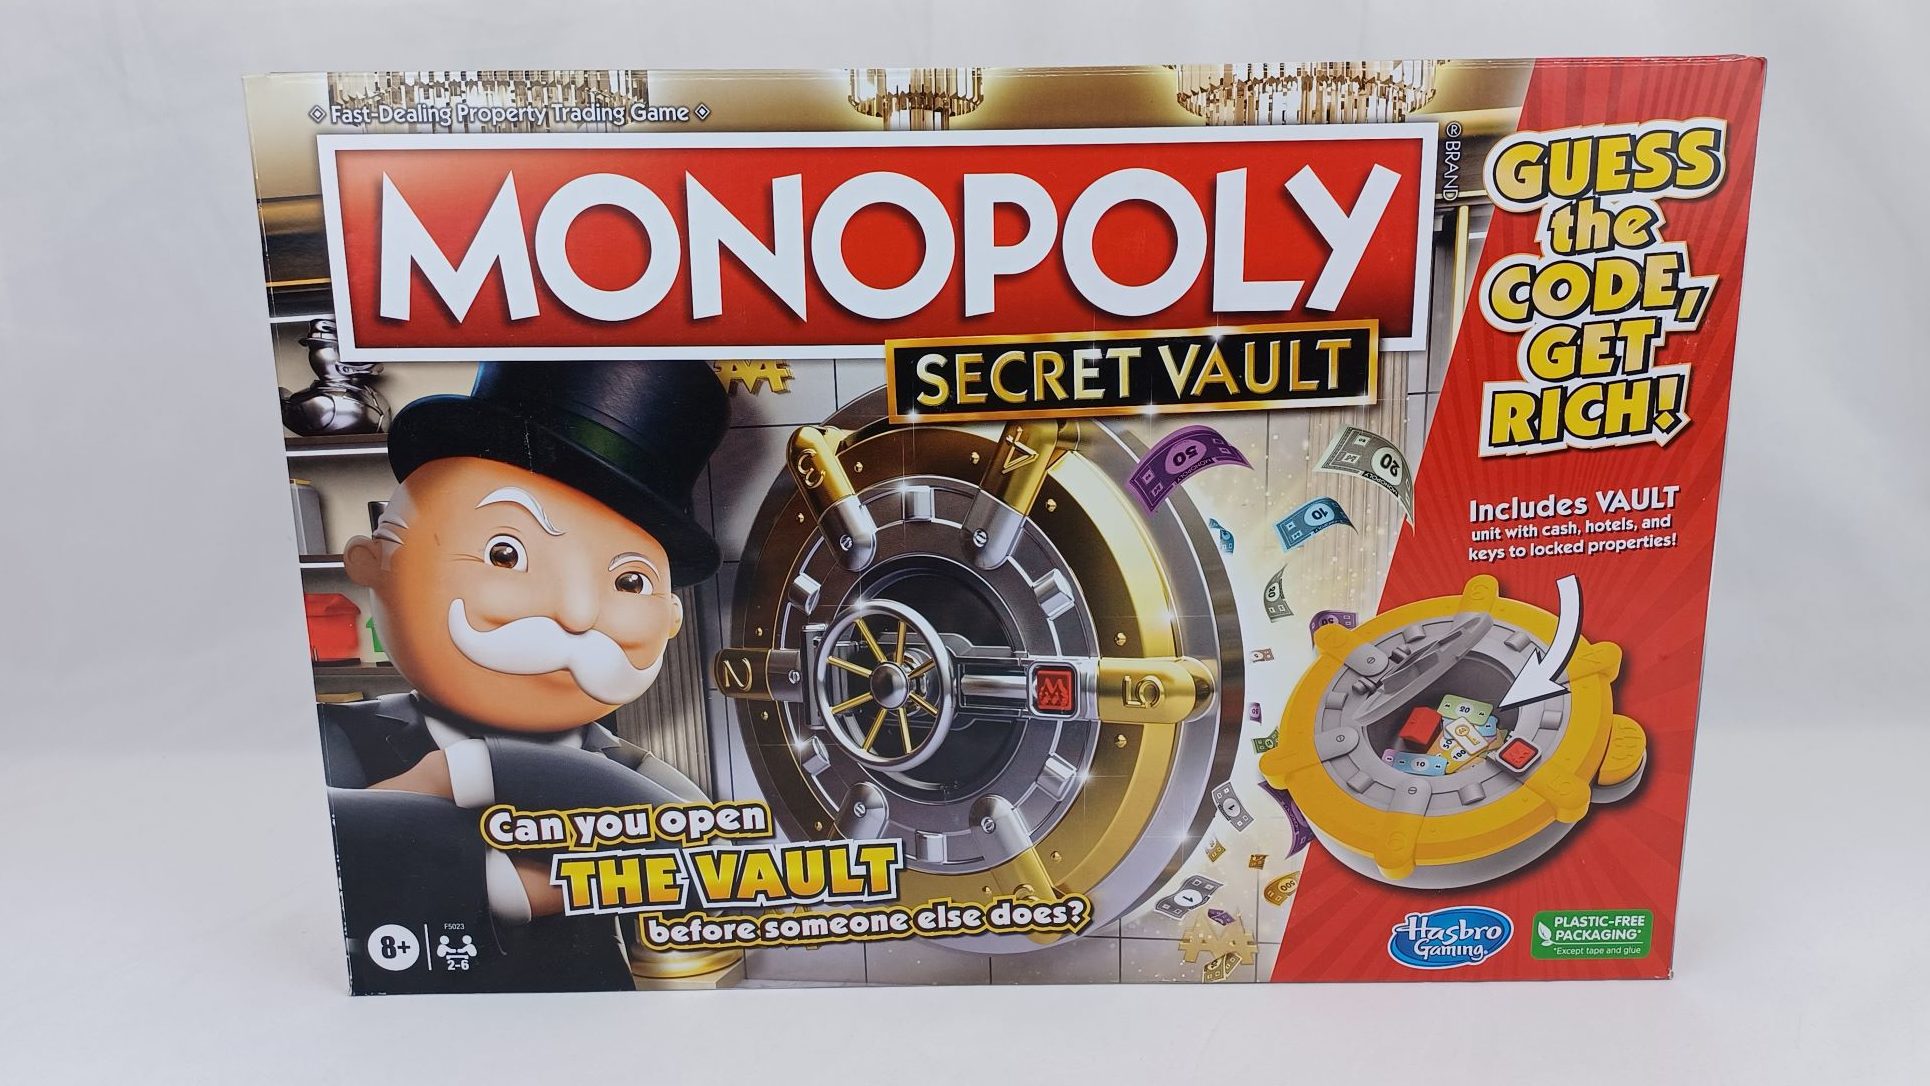 Monopoly Secret Vault Board Game: Rules and Instructions for How to Play - Geeky Hobbies